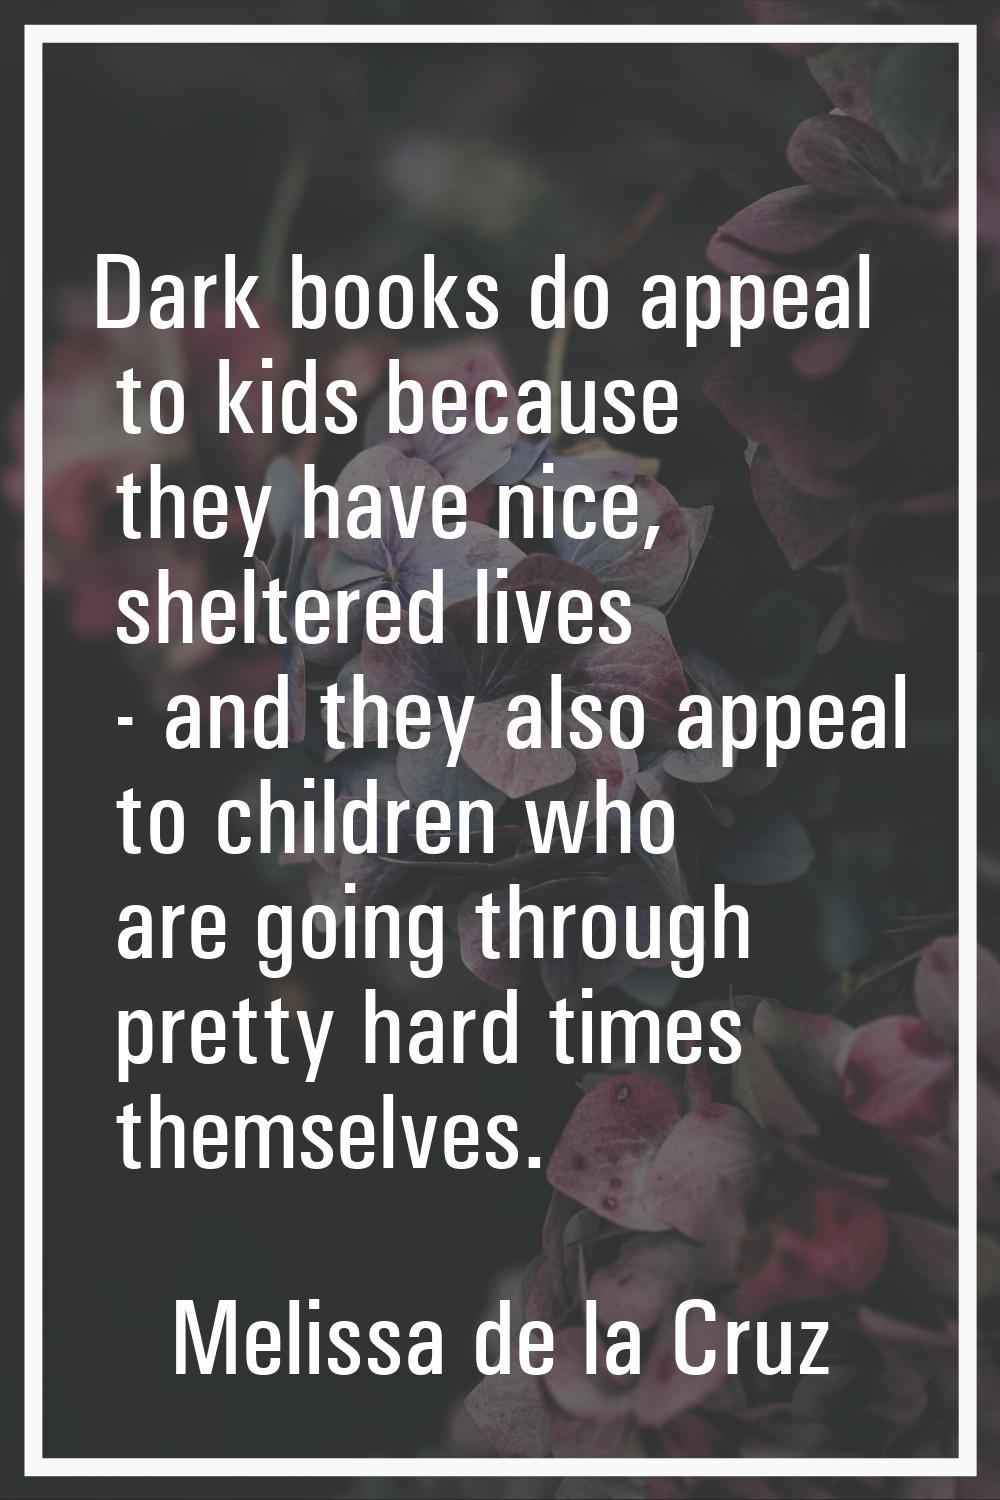 Dark books do appeal to kids because they have nice, sheltered lives - and they also appeal to chil